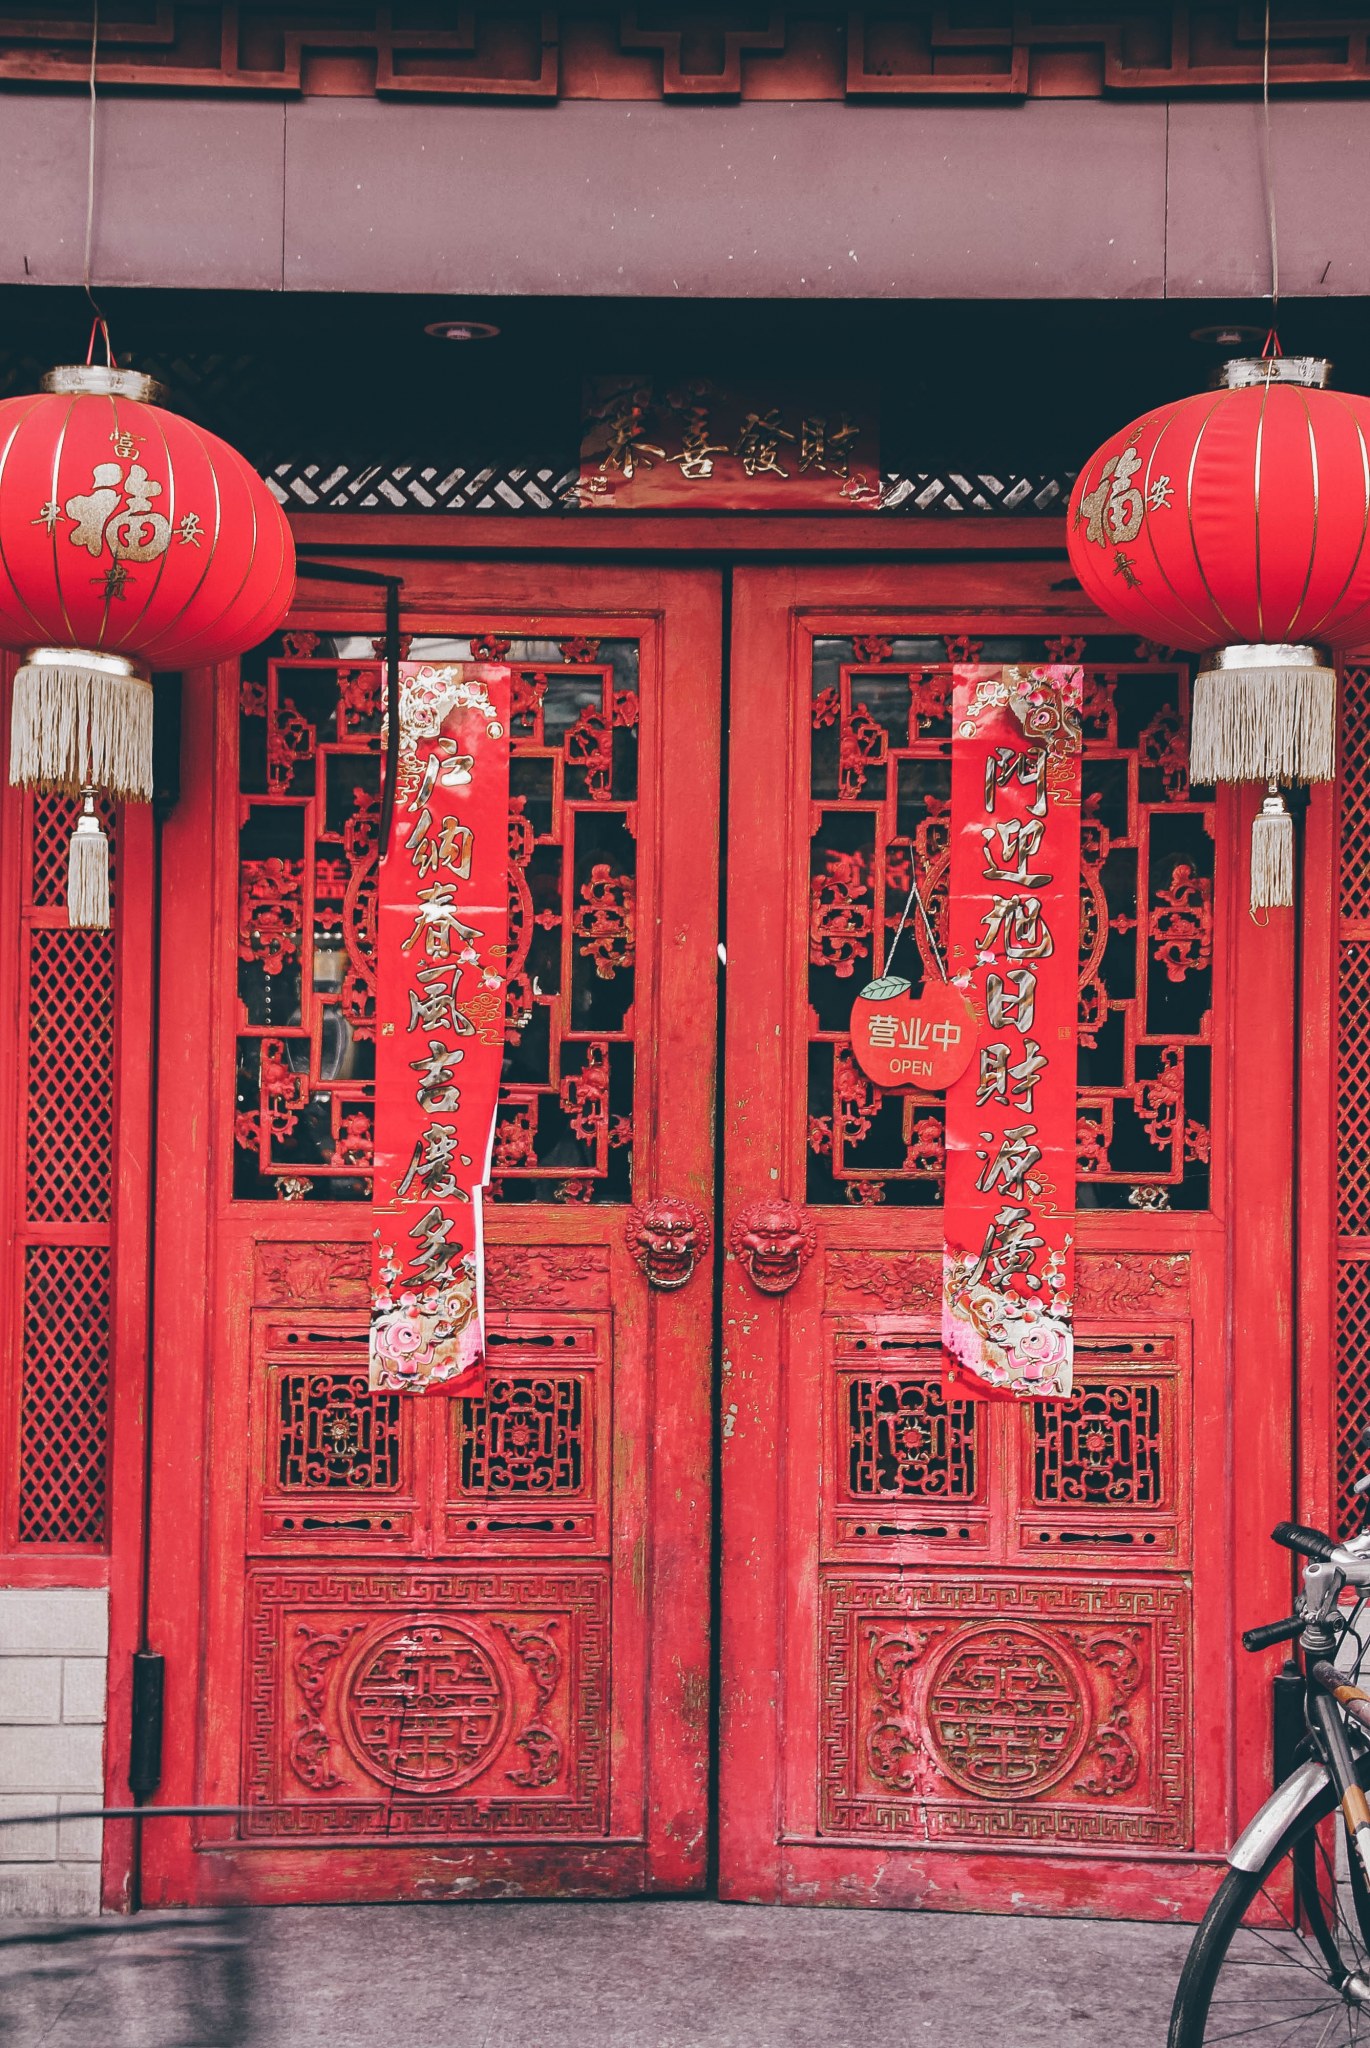 Large red wooden doors with red paper tapestries and lanterns hanging in front. One on each side.